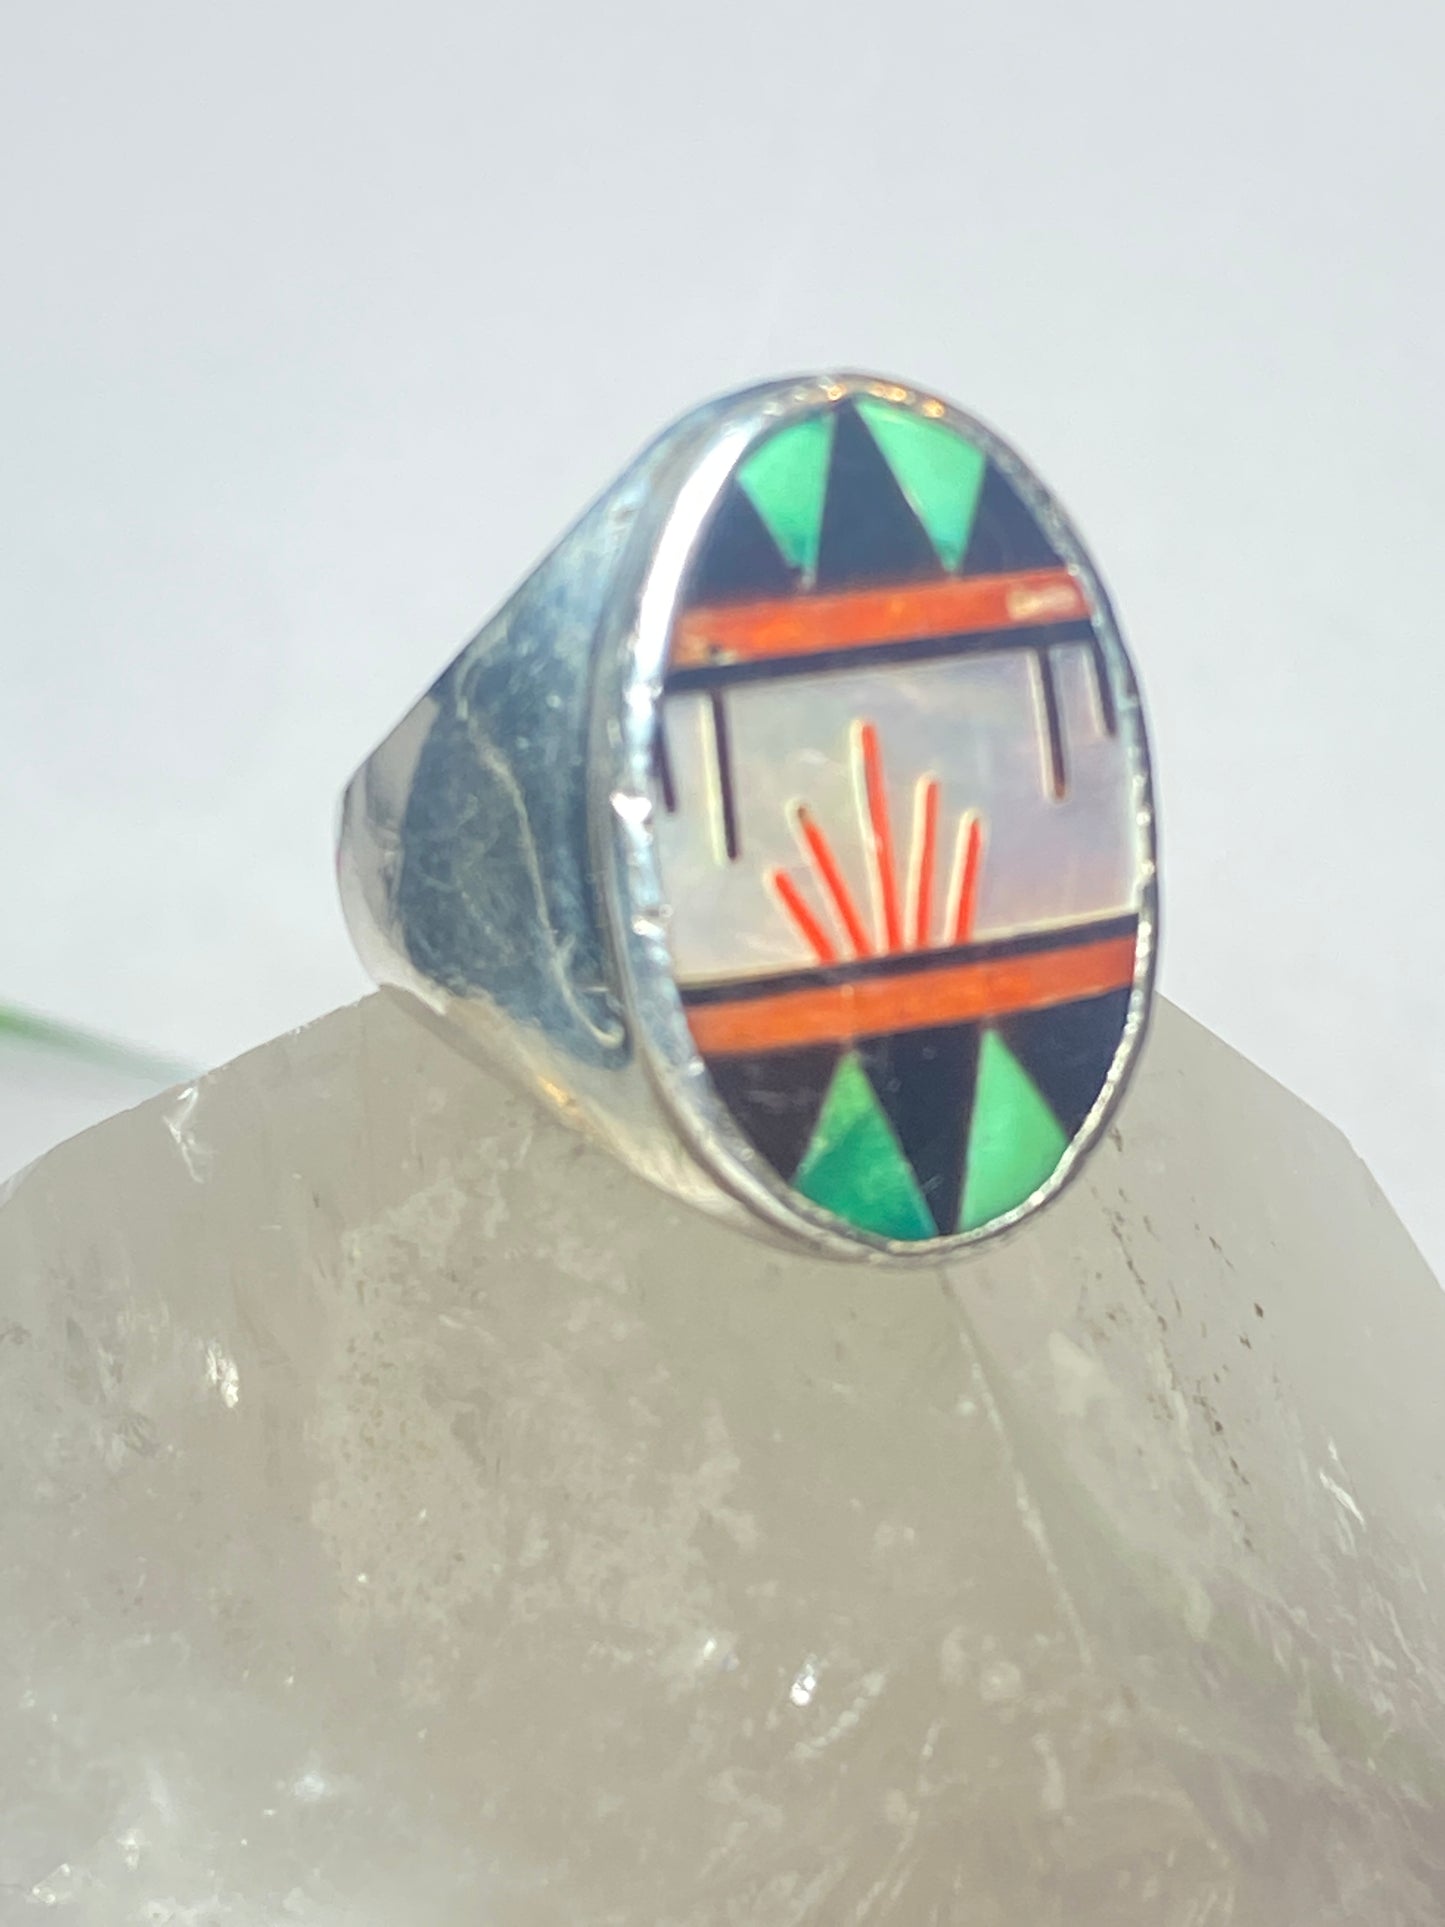 Turquoise ring Zuni mother of pearl onyx coral inlay sterling silver women men